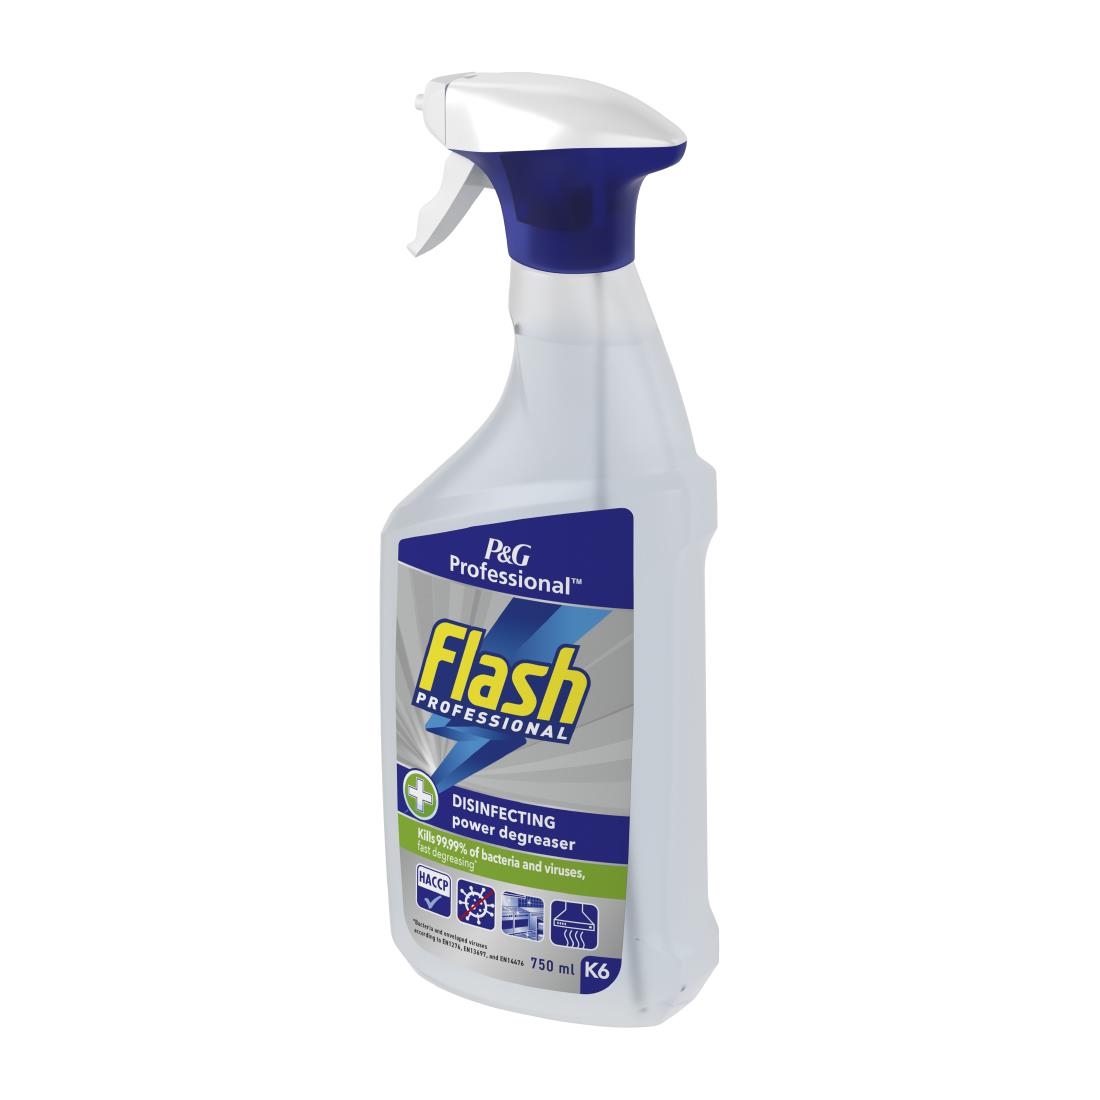 Flash Professional Disinfecting Power Degreaser Cleaning Spray 750ml Pack of 6 (DX565)